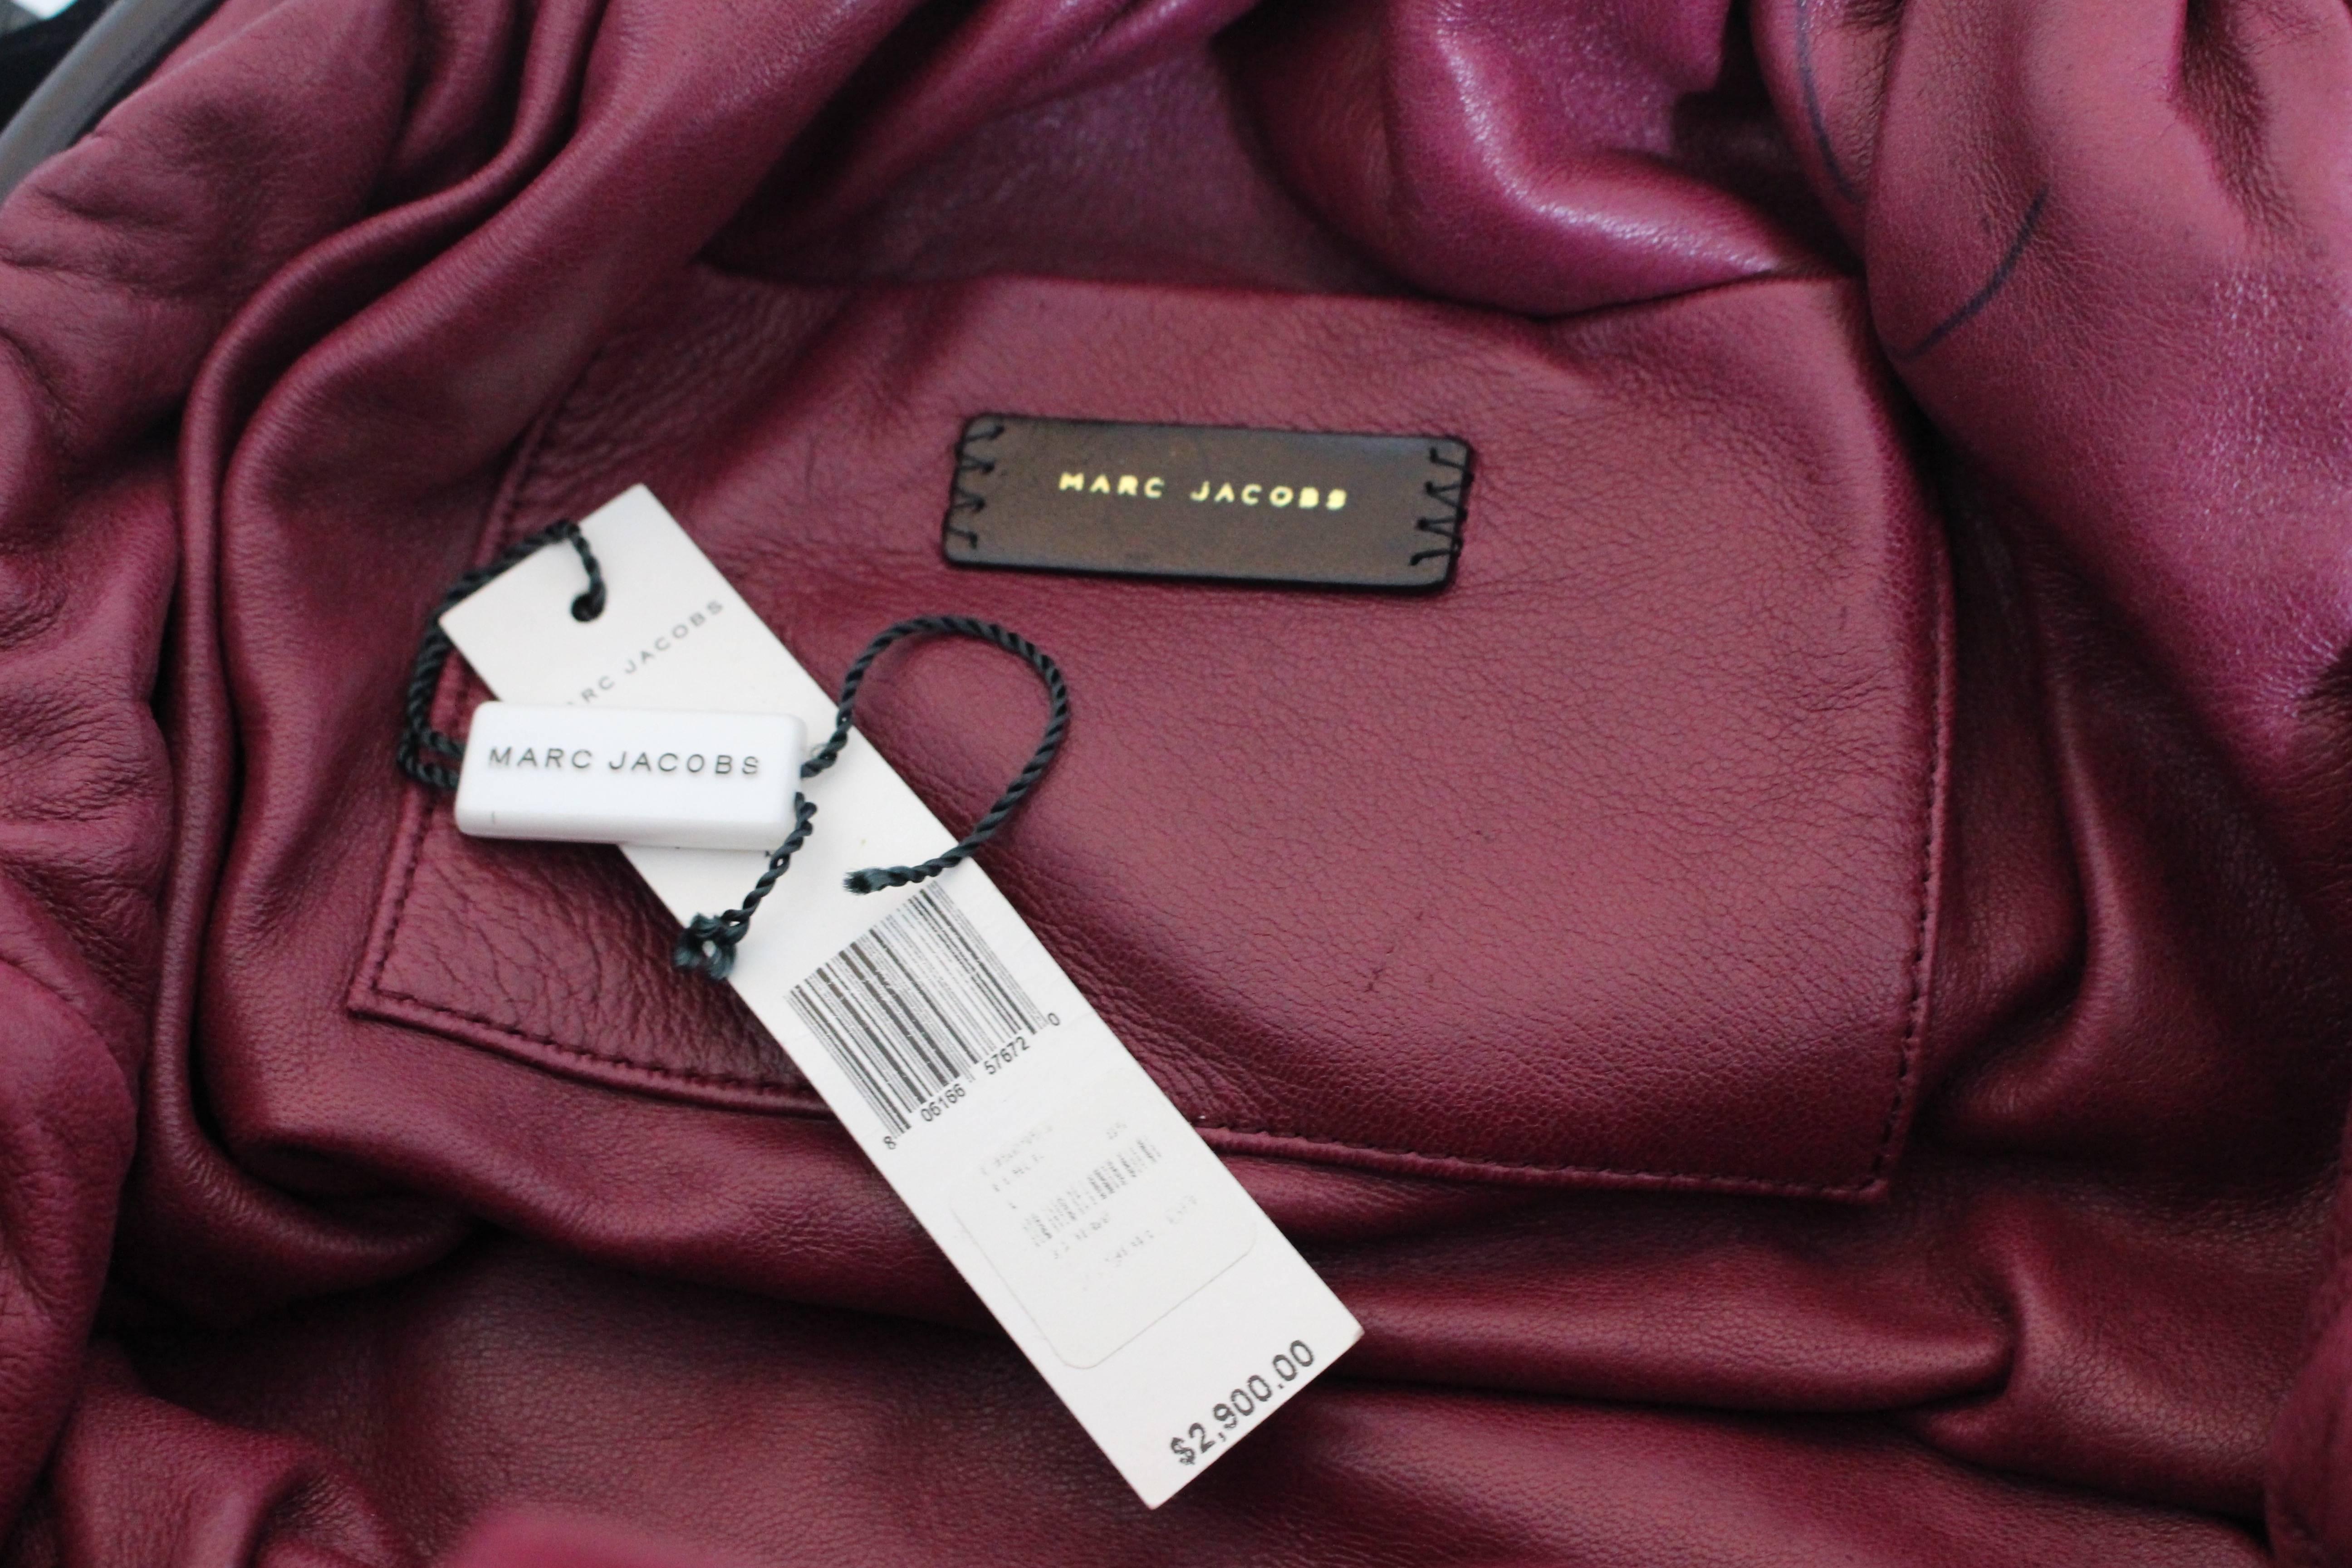 Marc Jacobs Fall 2005 Velvet Handbag w/ Leather and Ostrich Flower Detail Tags For Sale 2